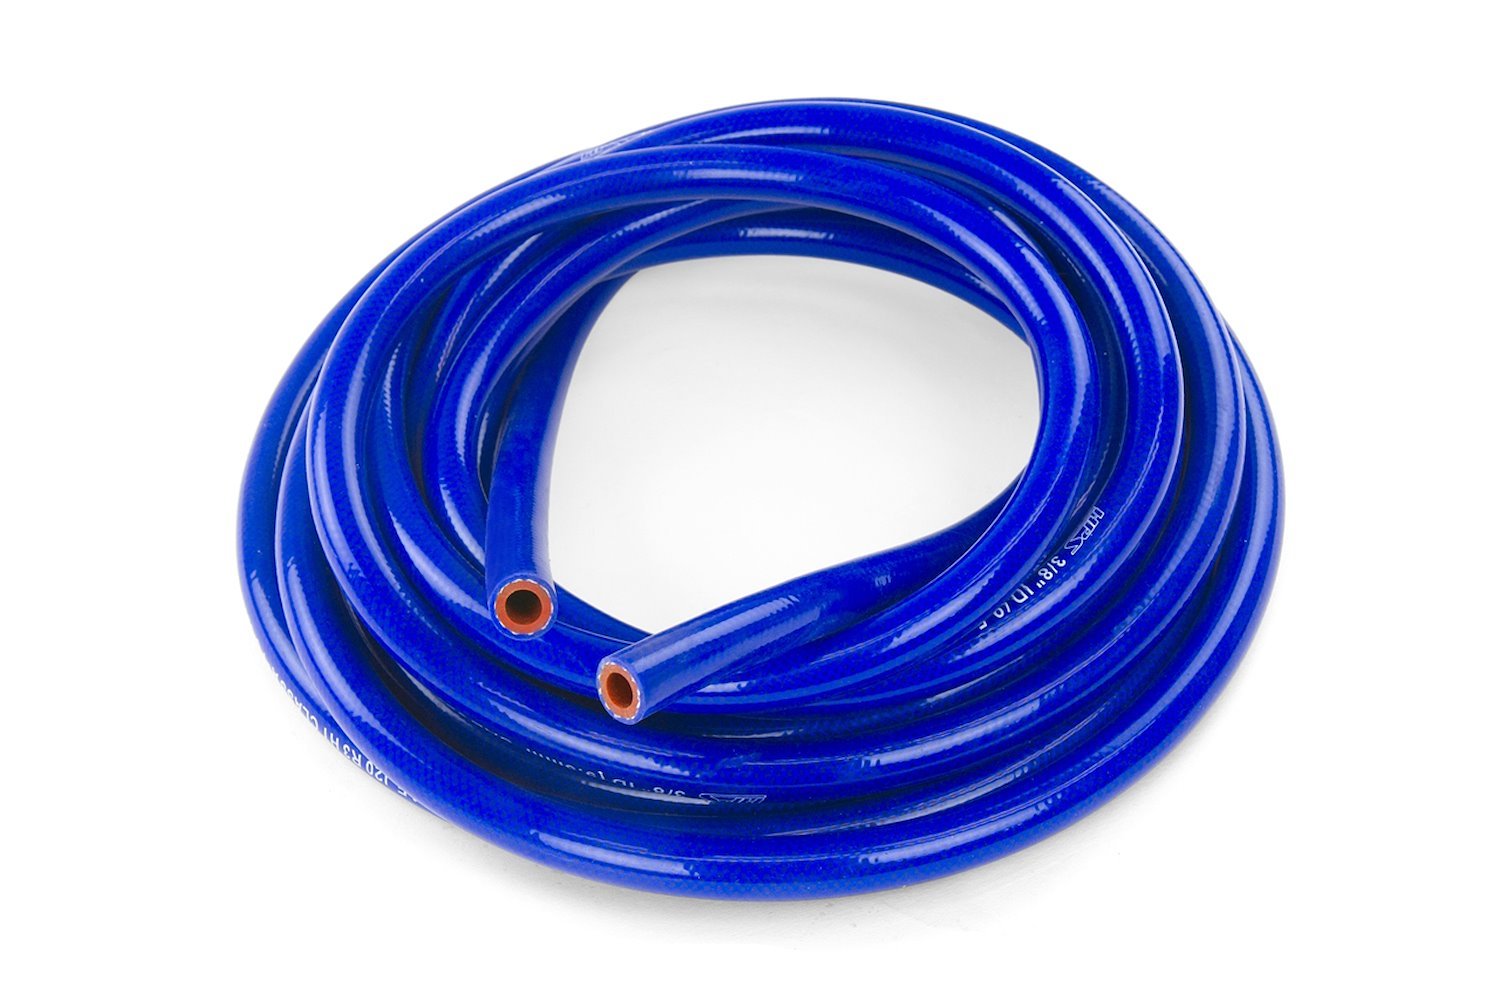 HTHH-087-BLUEx25 Silicone Heater Hose Tubing, High-Temp 1-Ply Reinforced, 7/8 in. ID, 25 ft. Roll, Blue